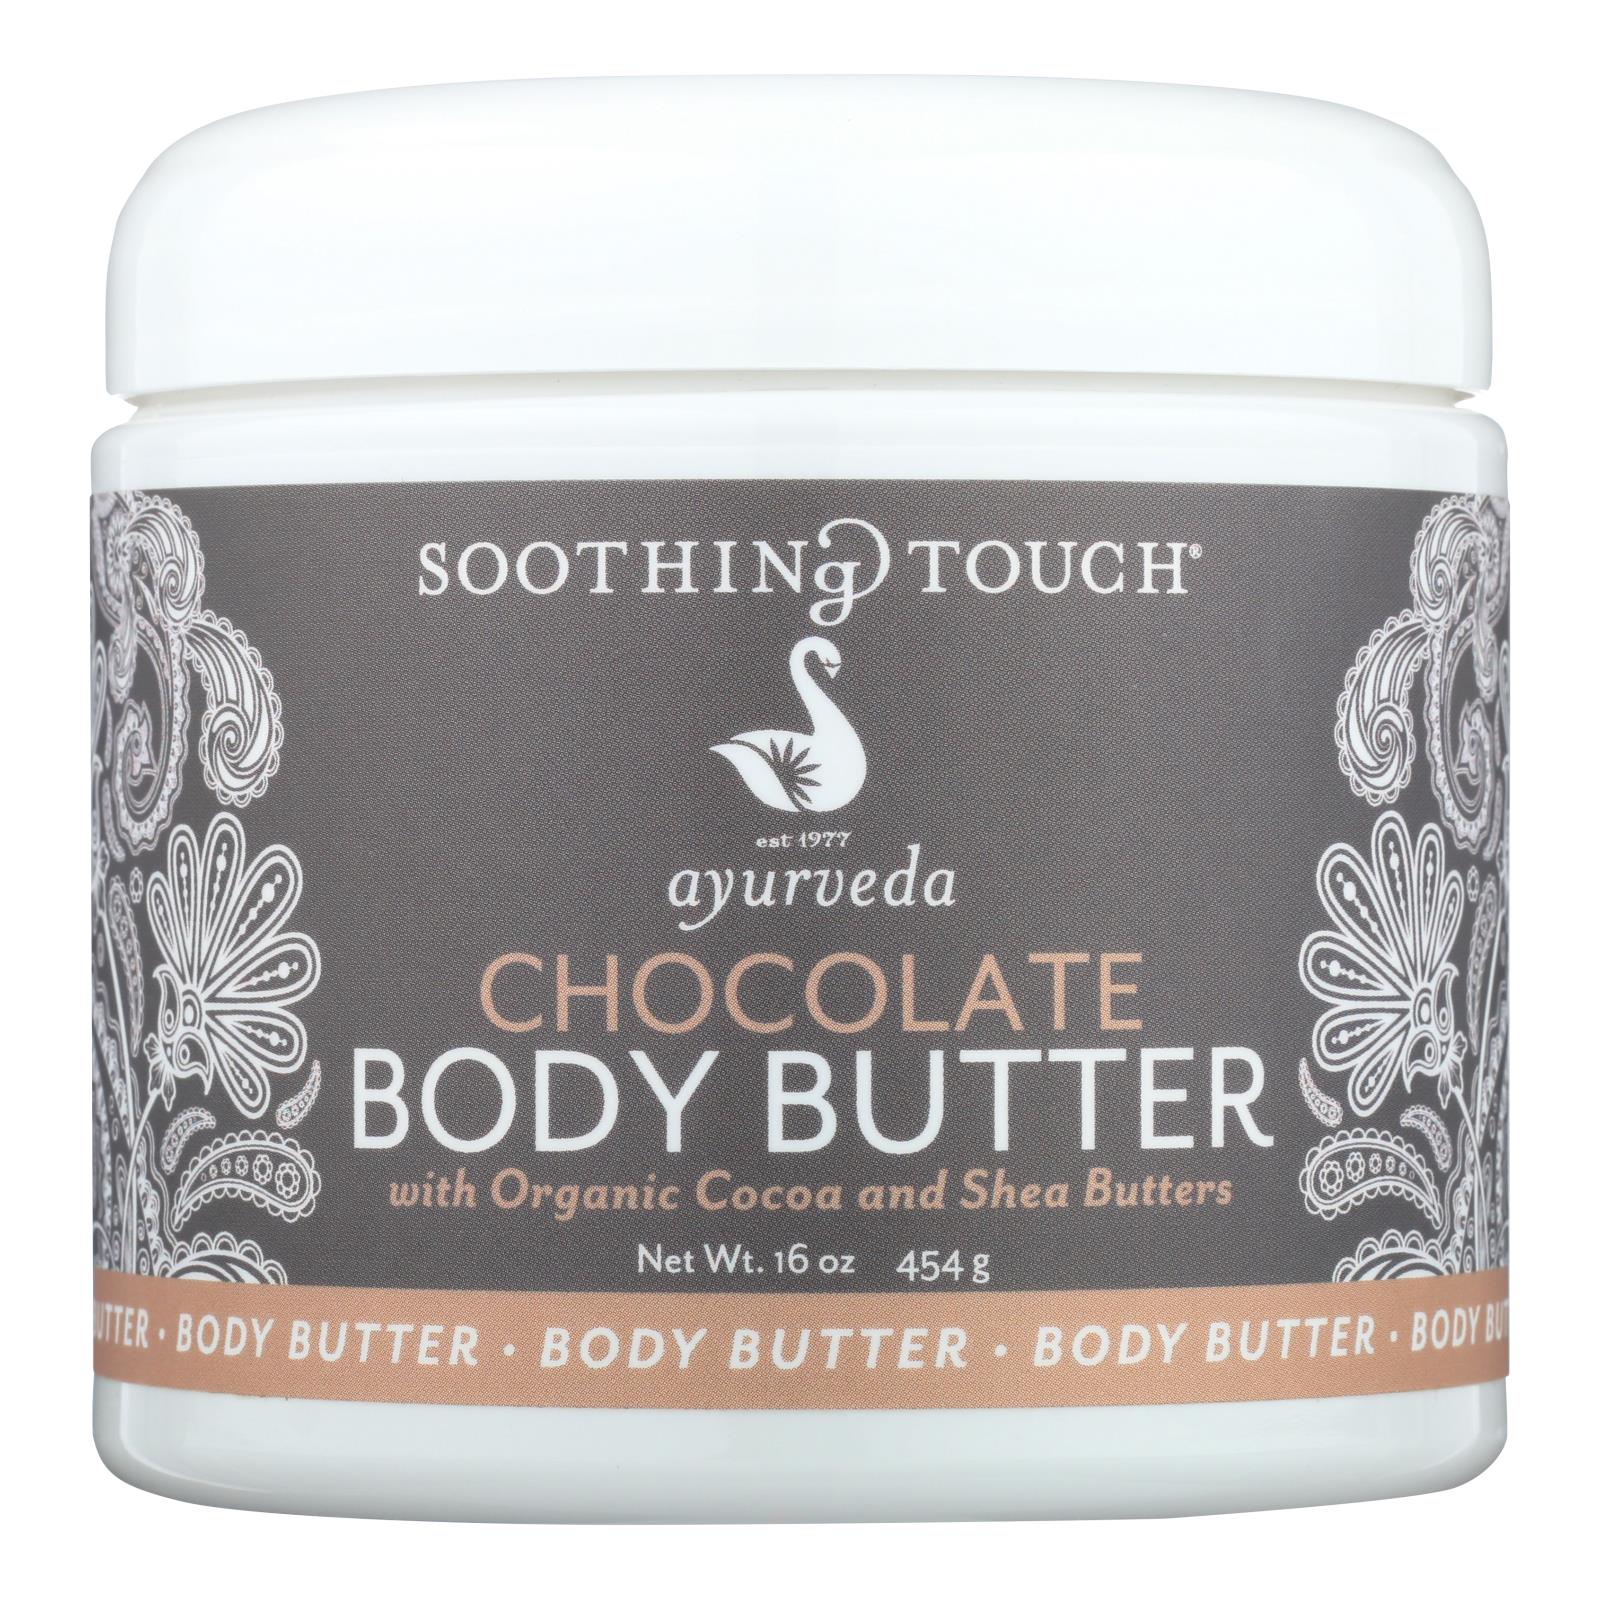 Soothing Touch - Body Butter Chocolate - 1 Each-13 Oz